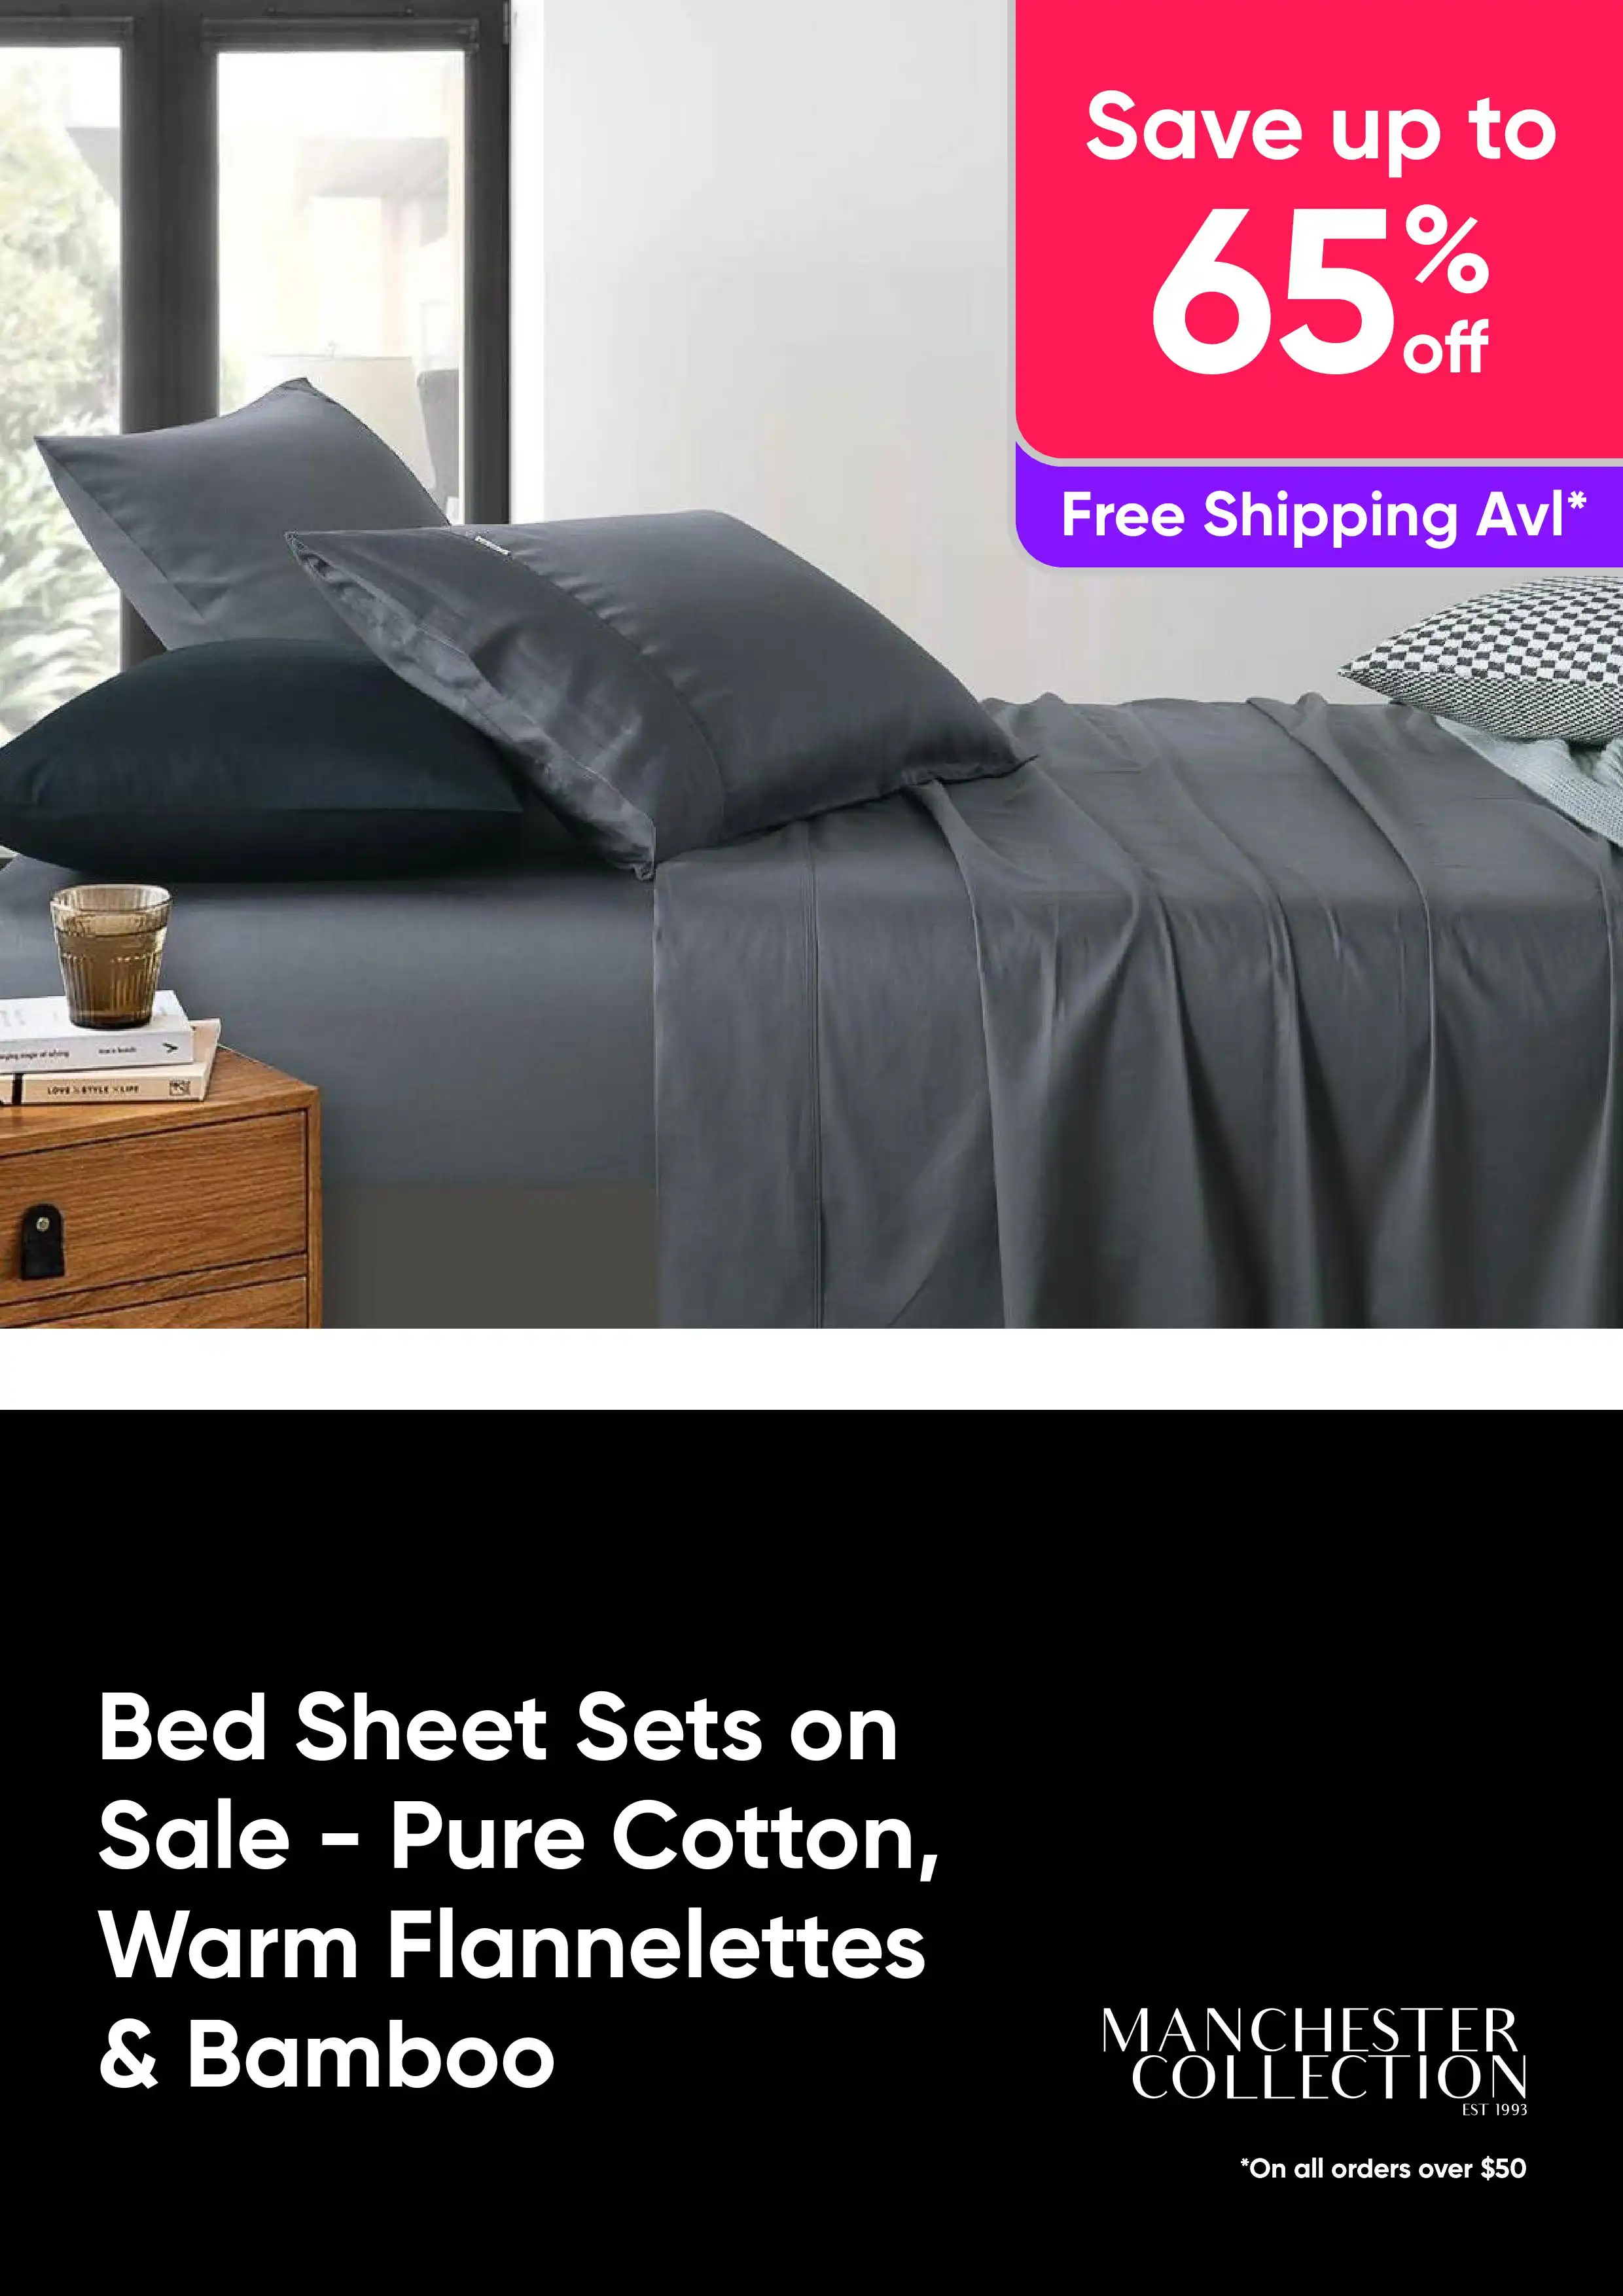 Bed Sheet Sets on Sale Now - Save up to 65% on Pure Cotton Sheets